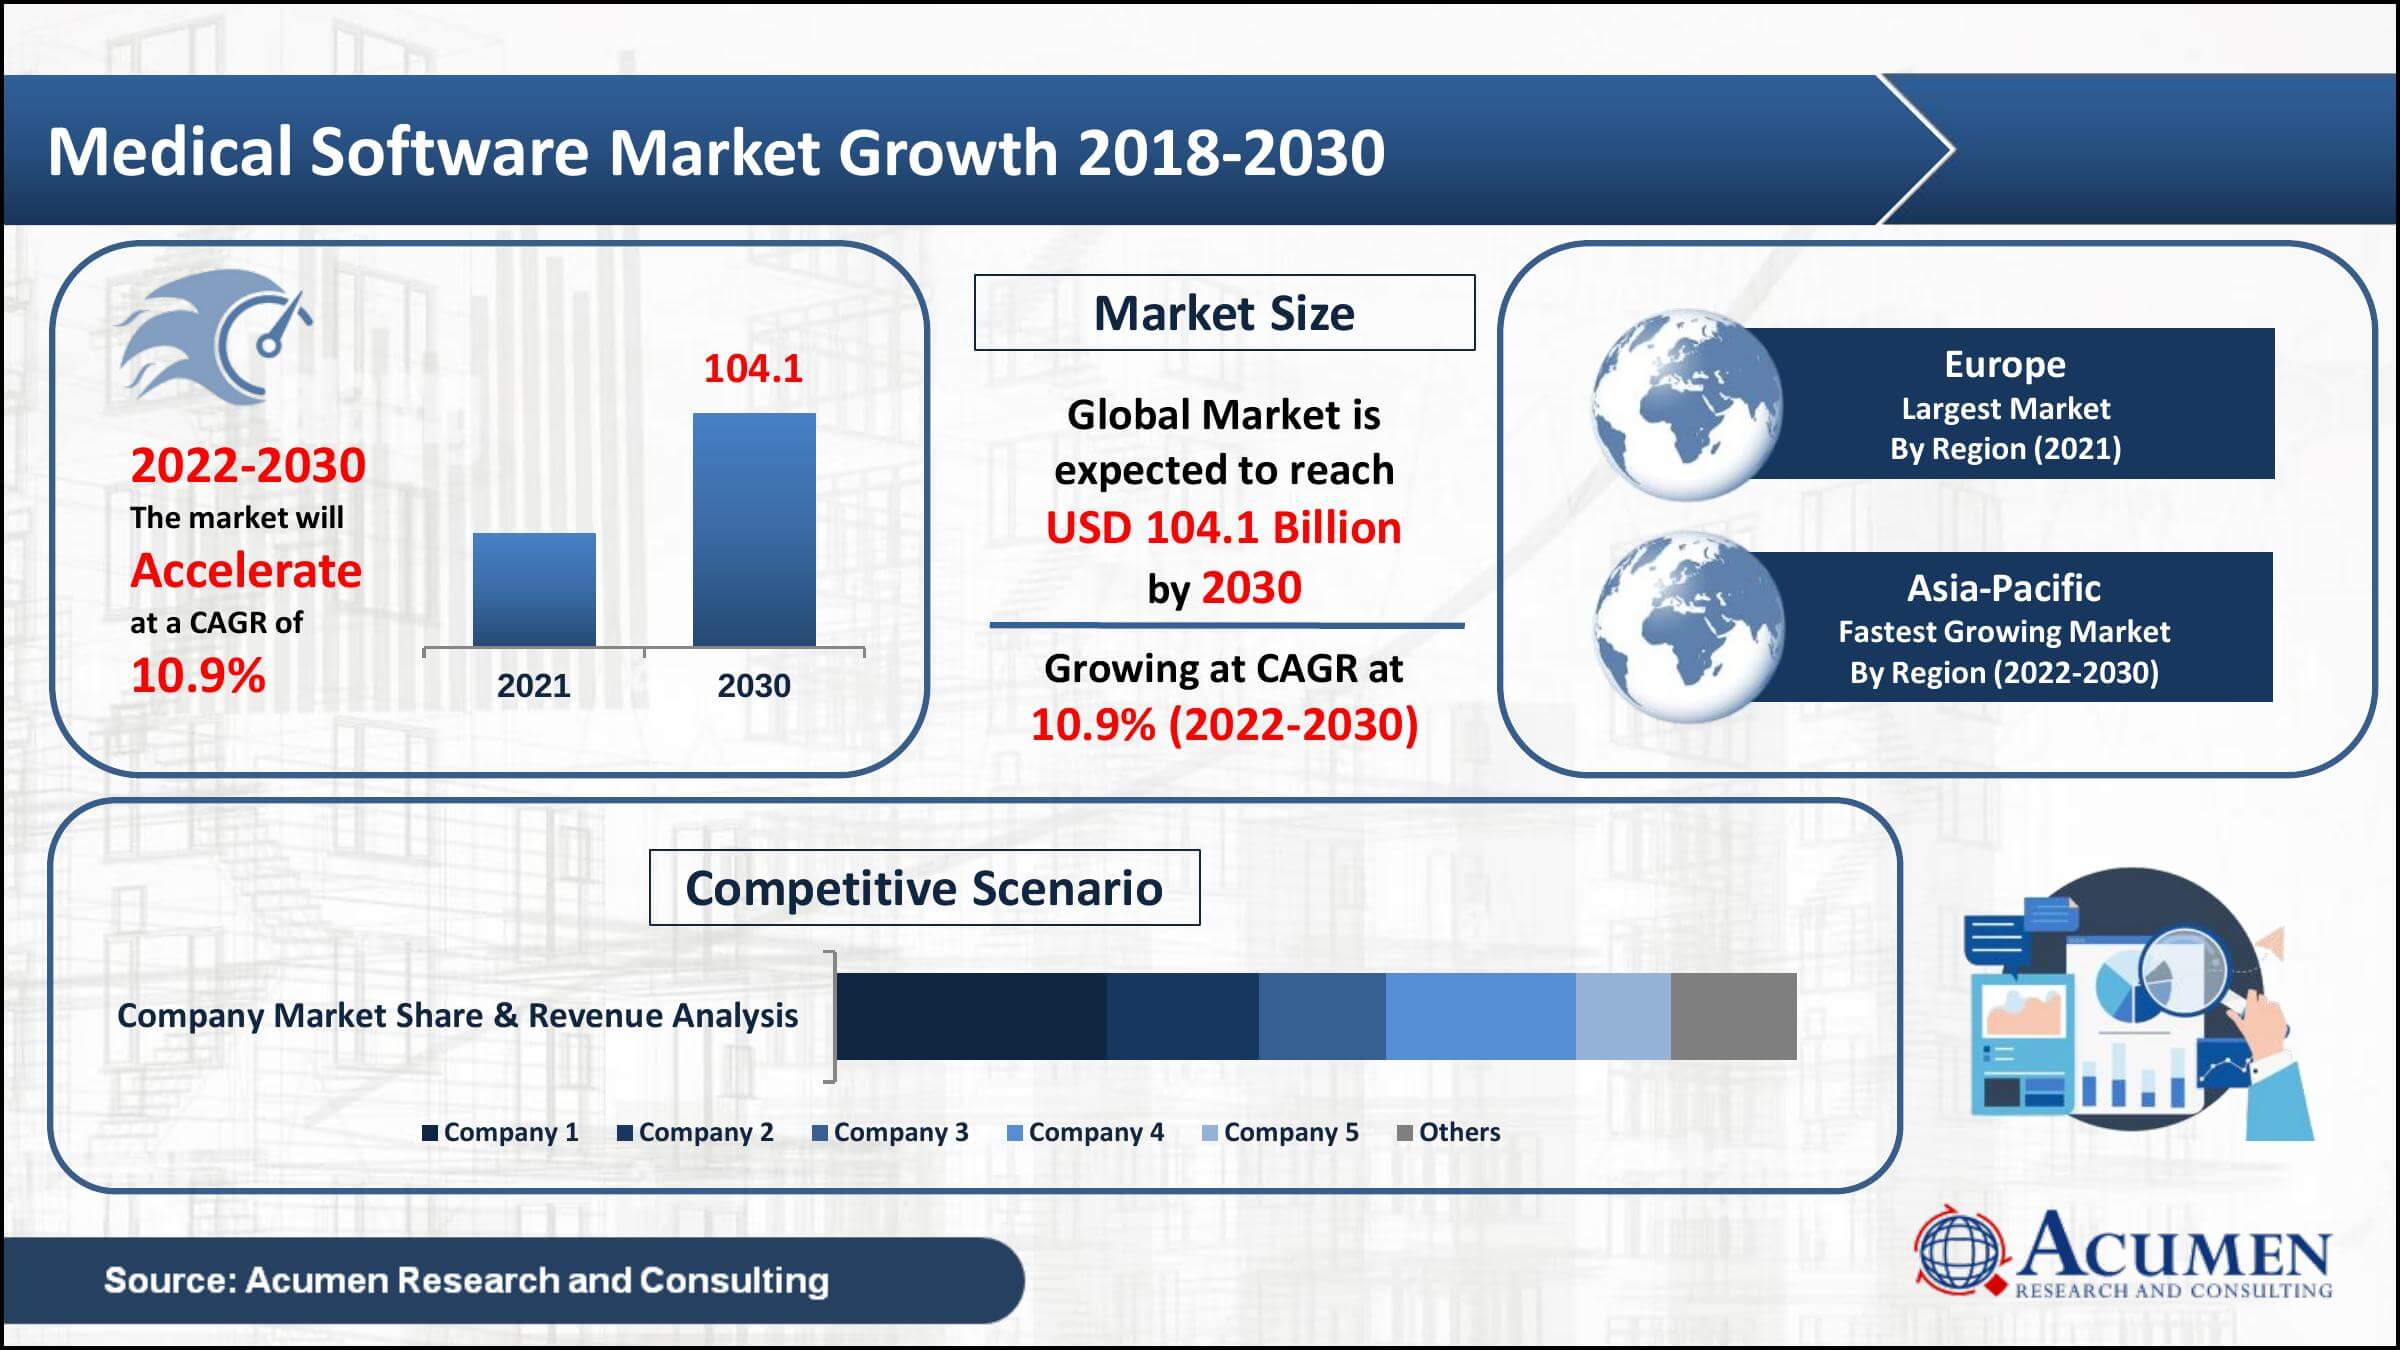 Global medical software market revenue collected USD 41.2 Billion in 2021, with a 10.9% CAGR between 2022 and 2030